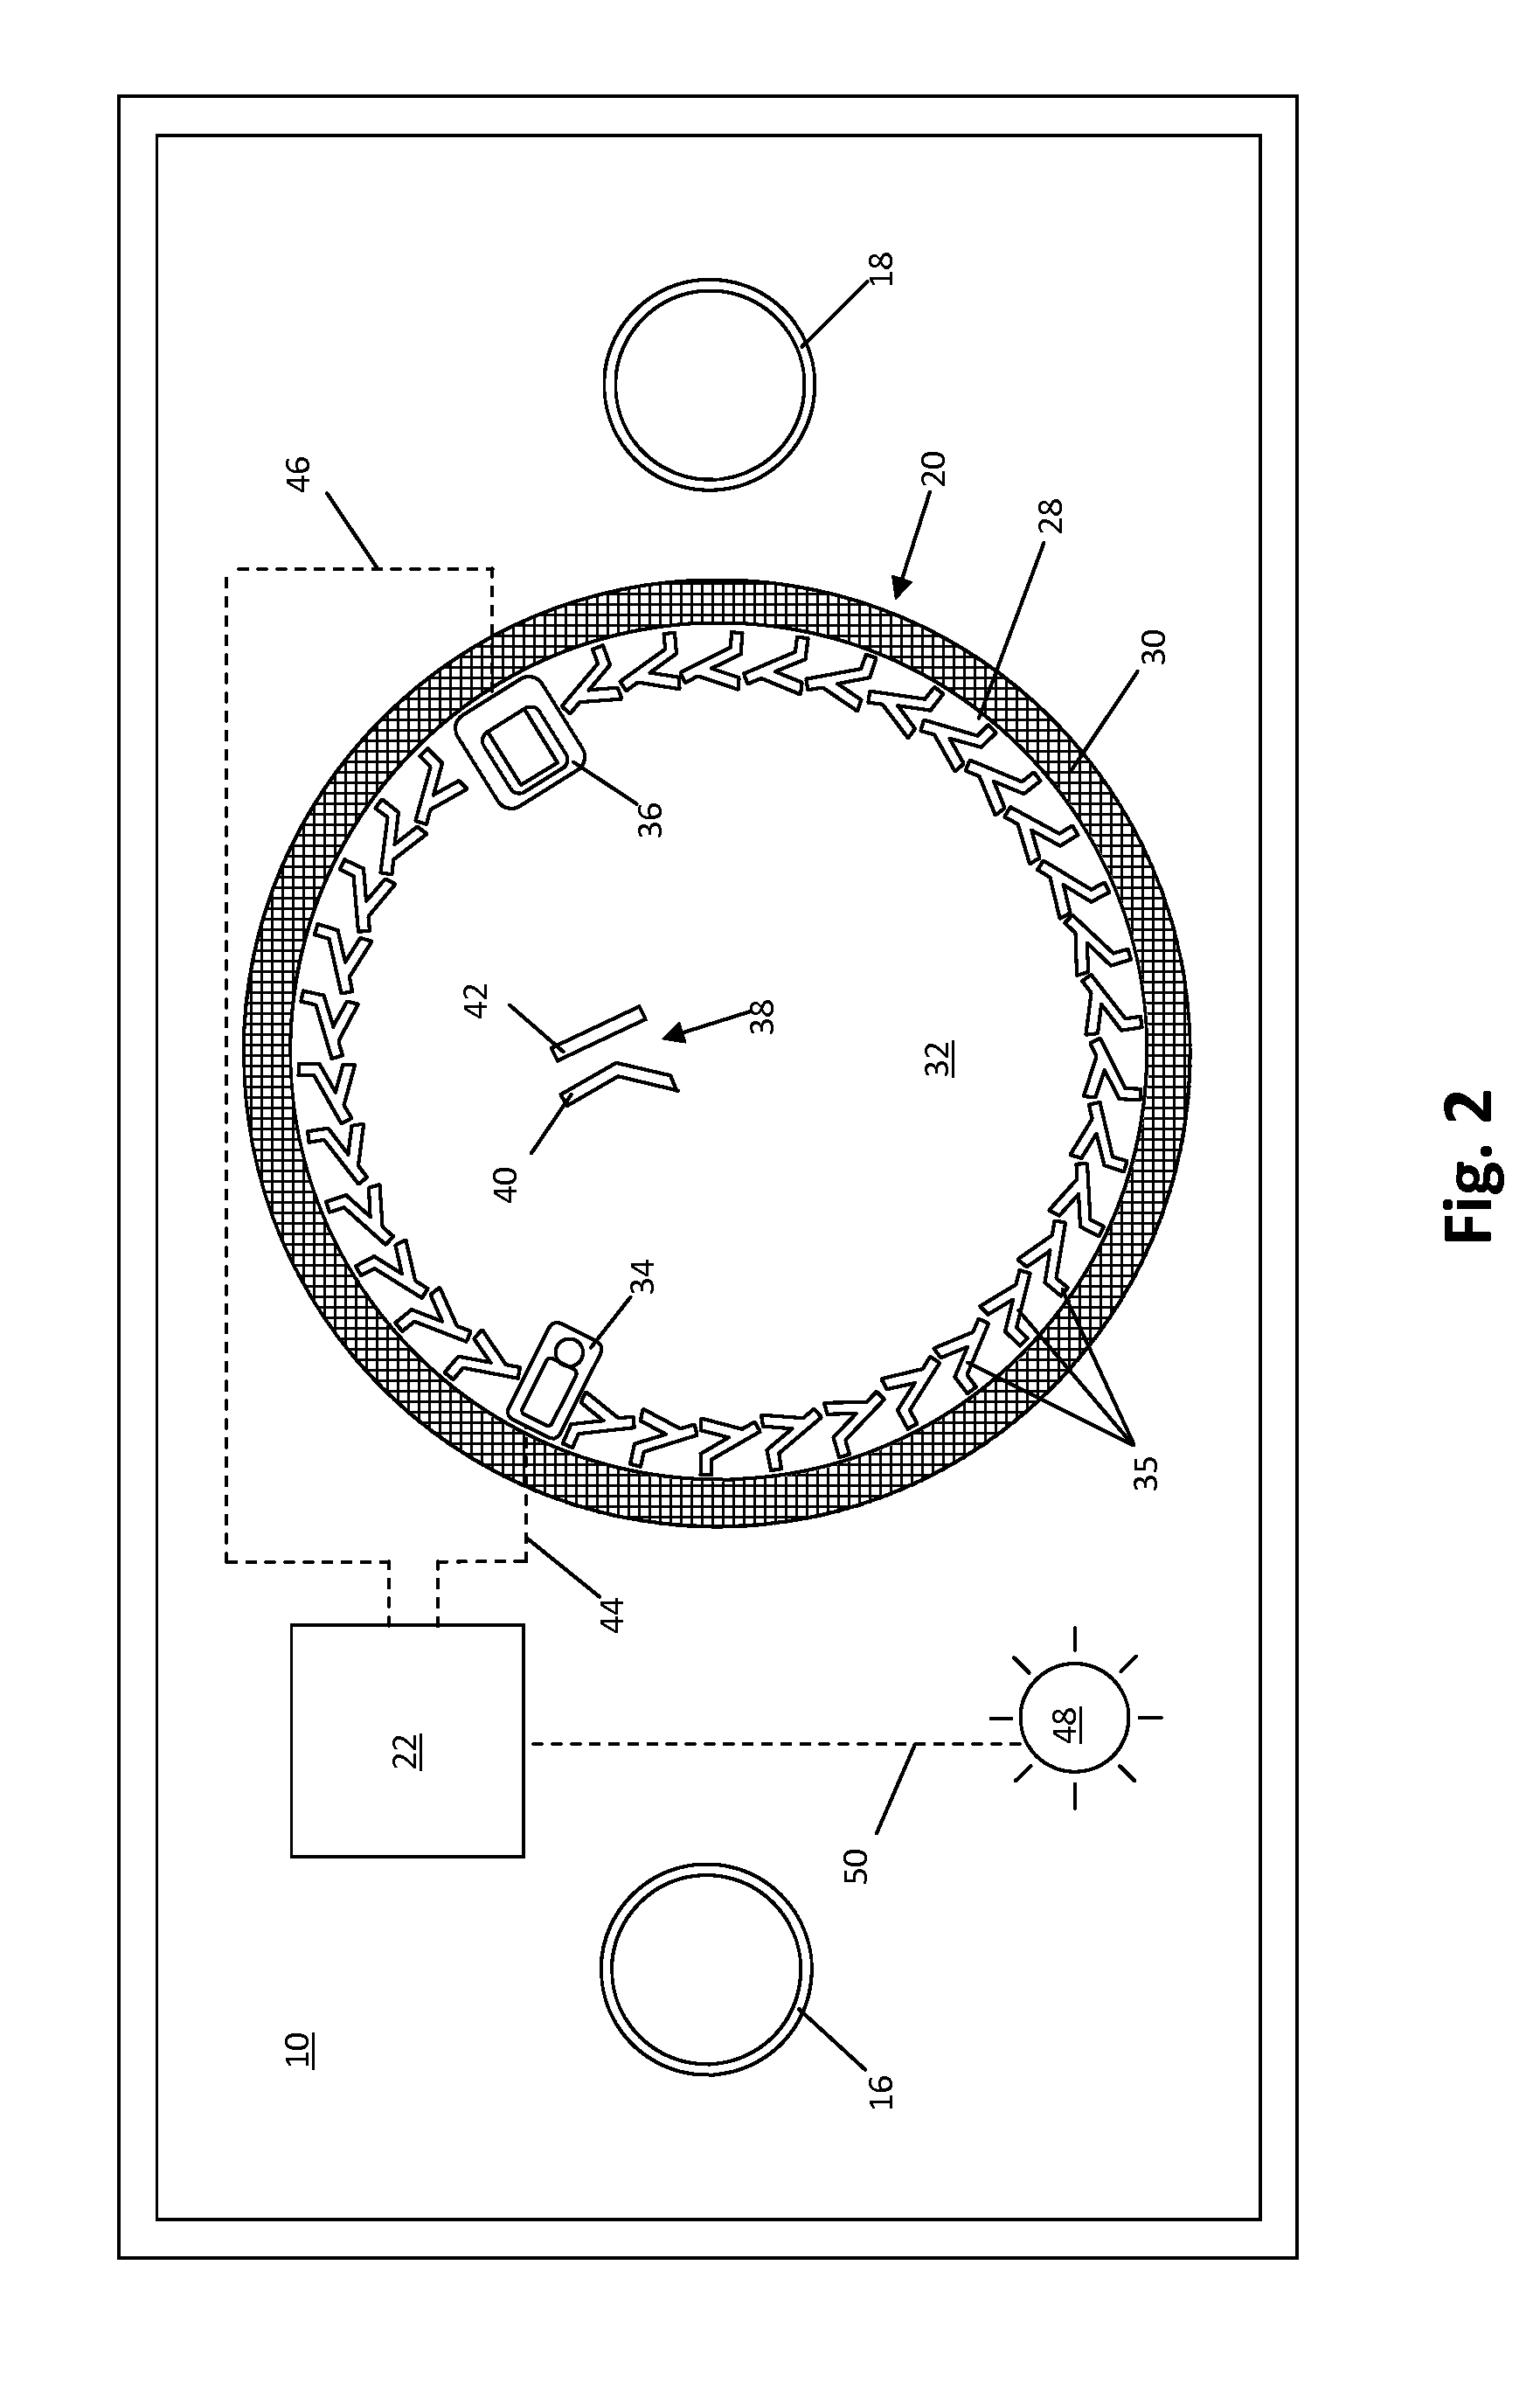 Duct detector with improved functional test capability